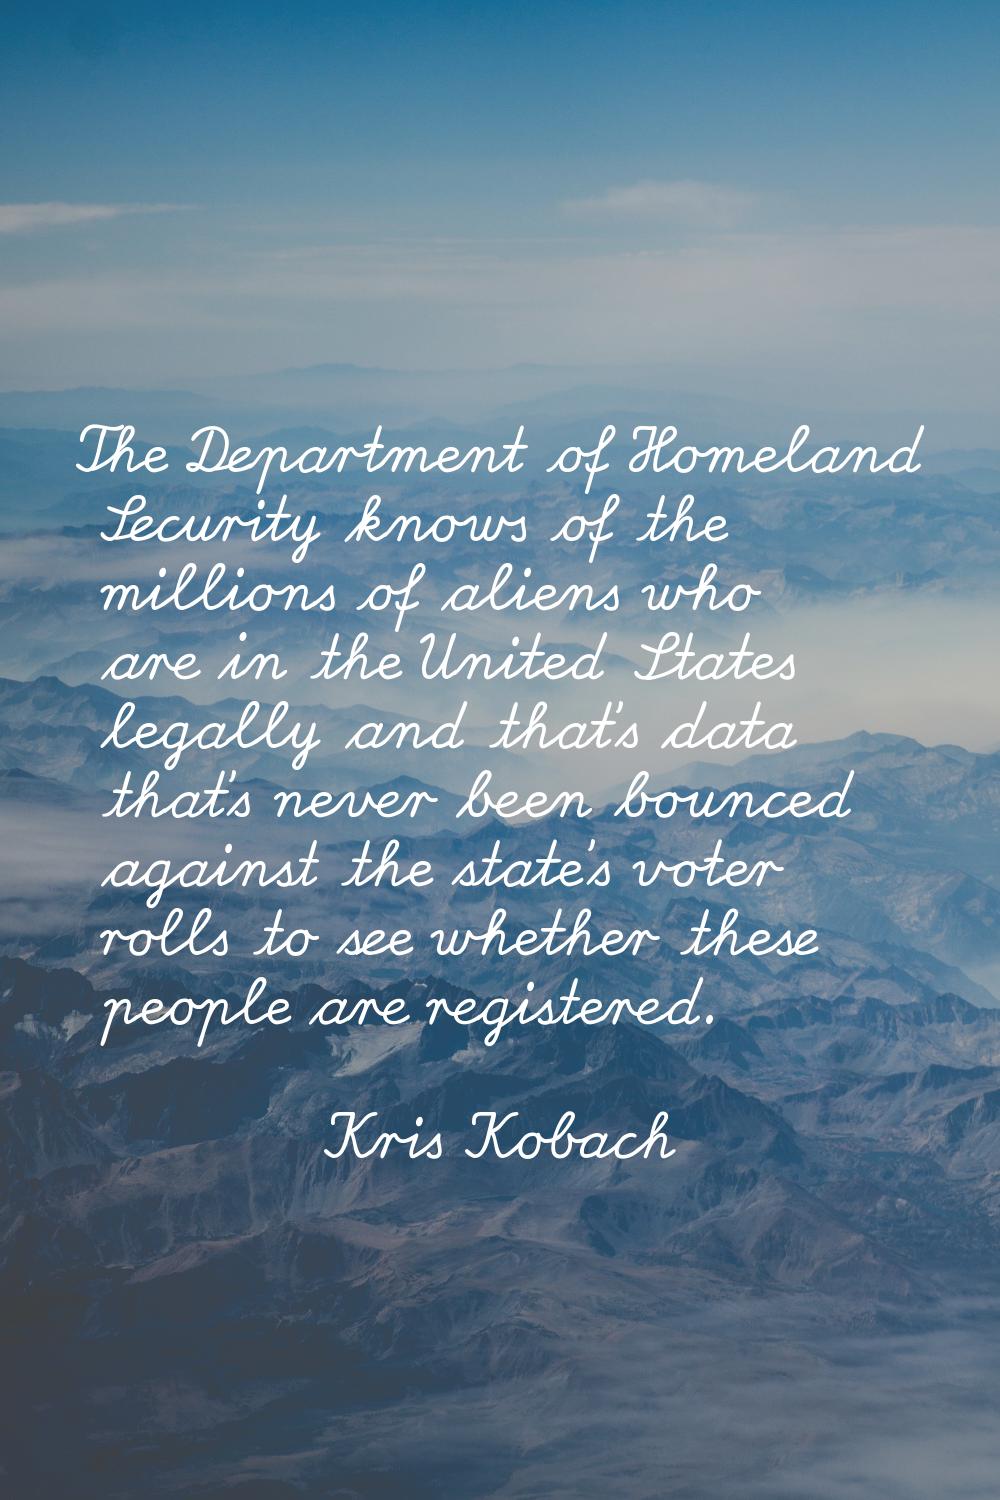 The Department of Homeland Security knows of the millions of aliens who are in the United States le